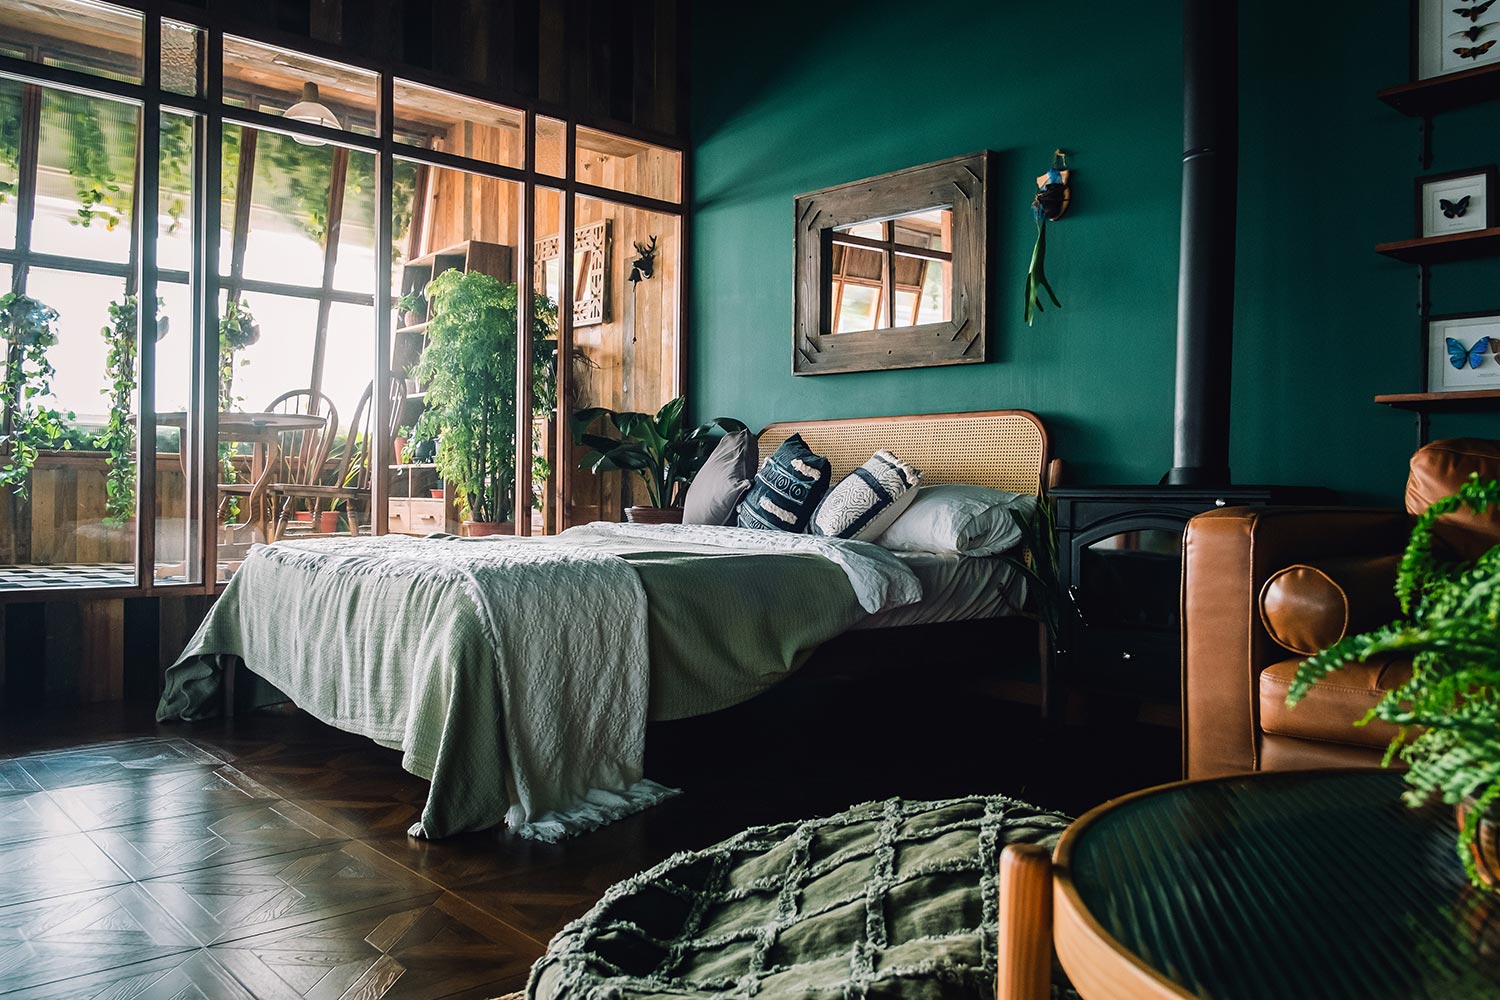 A stylish loft bedroom interior with brown coloured rattan furniture and wooden elements with dark green coloured wall